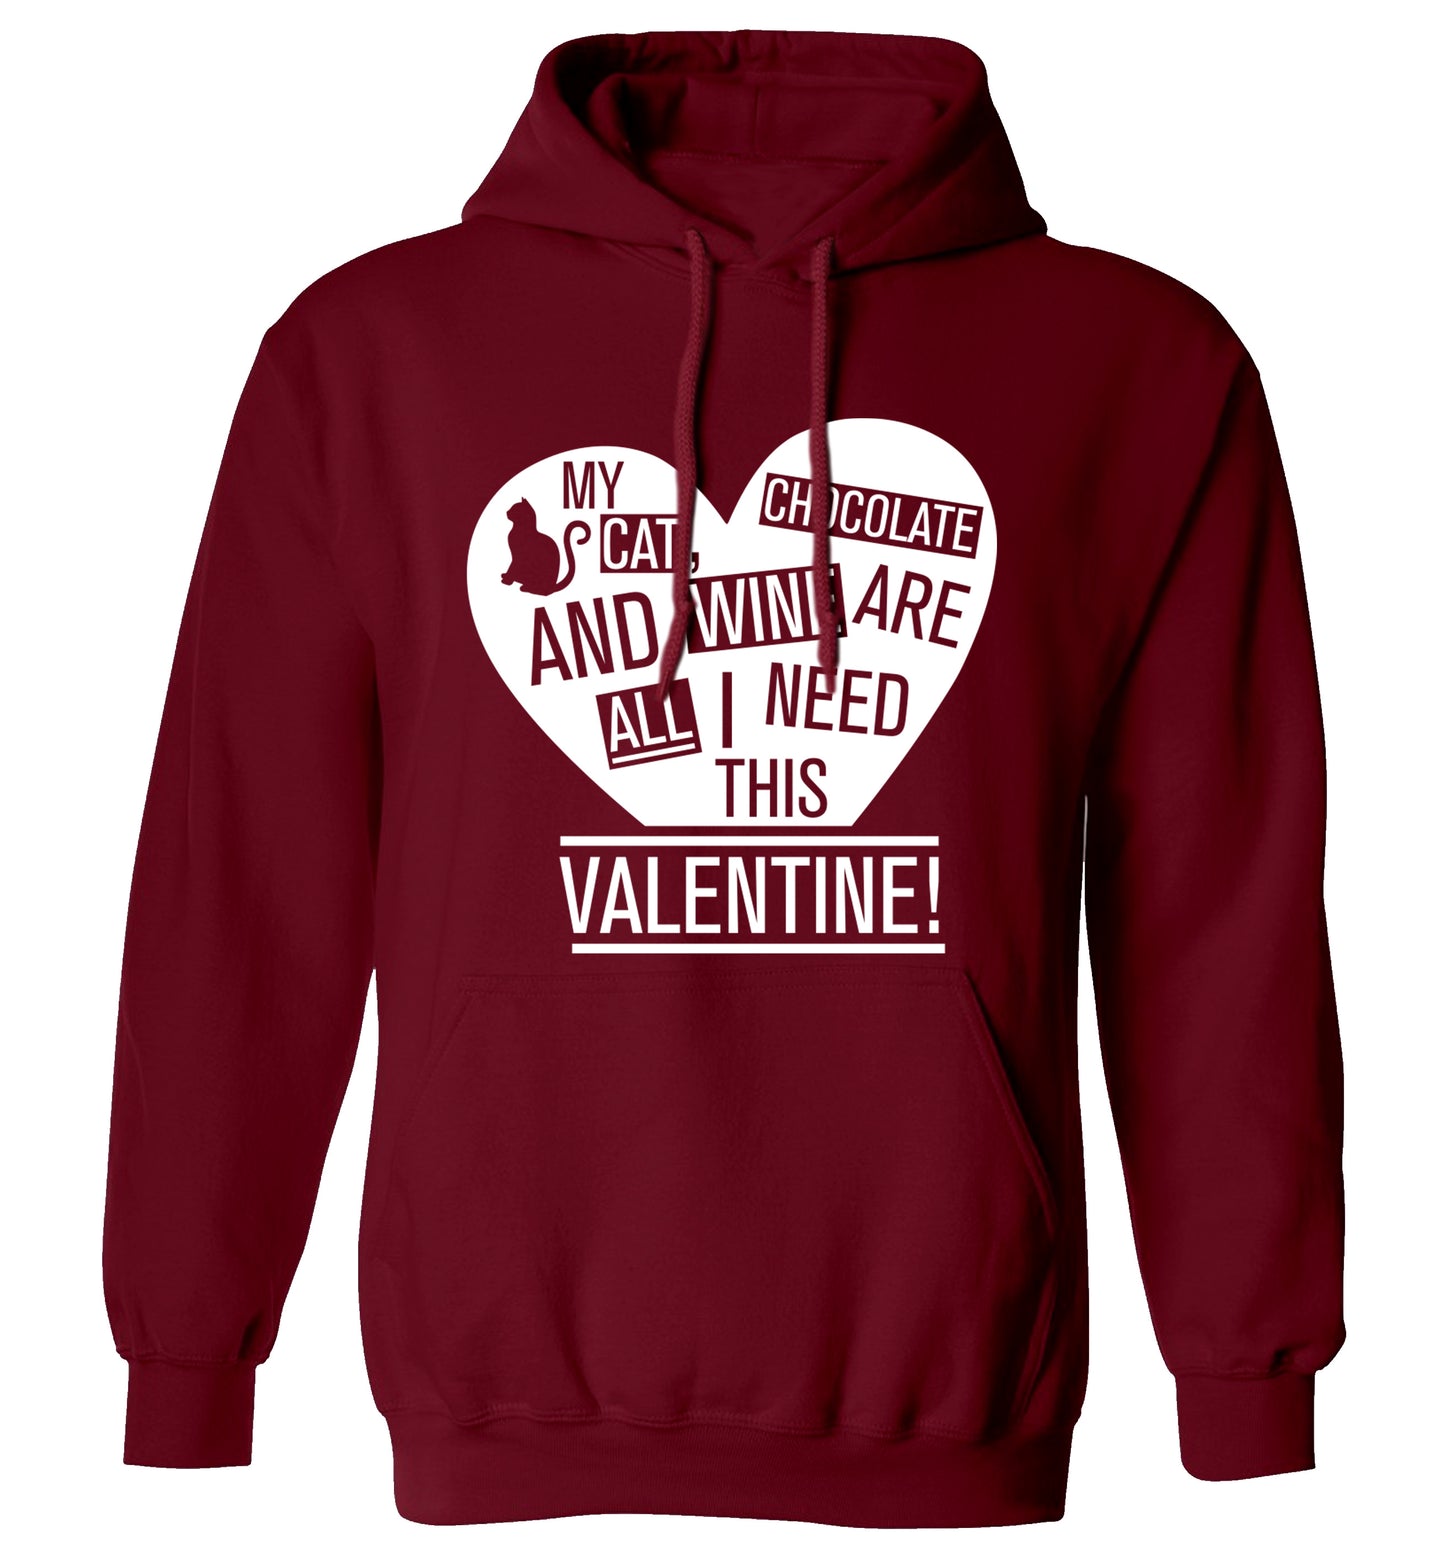 My cat, chocolate and wine are all I need this valentine! adults unisex maroon hoodie 2XL